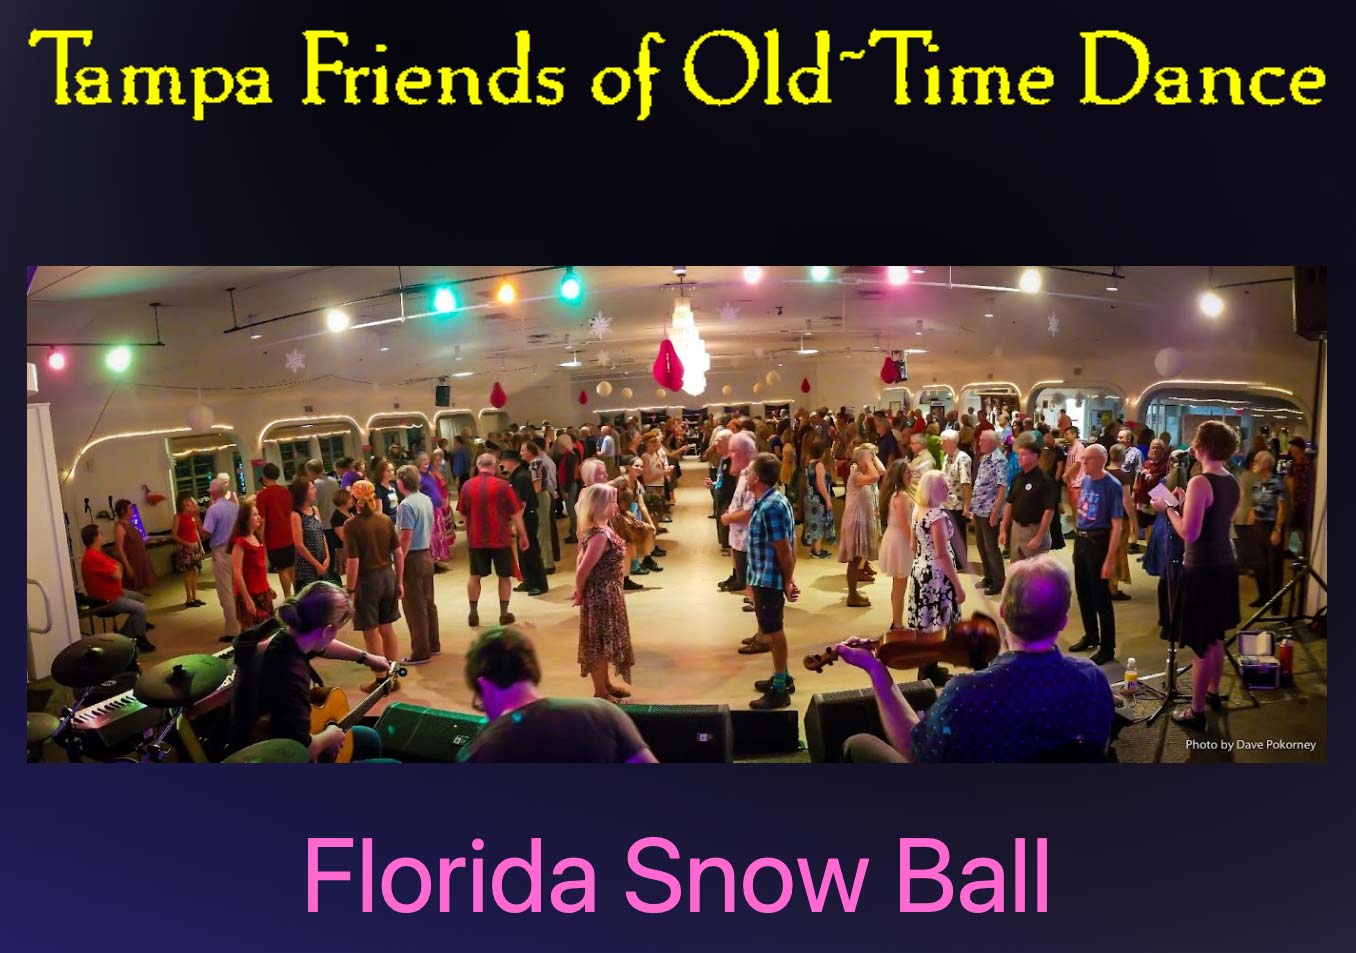 Tampa Friends of Old Time Dance—Florida Snow Ball